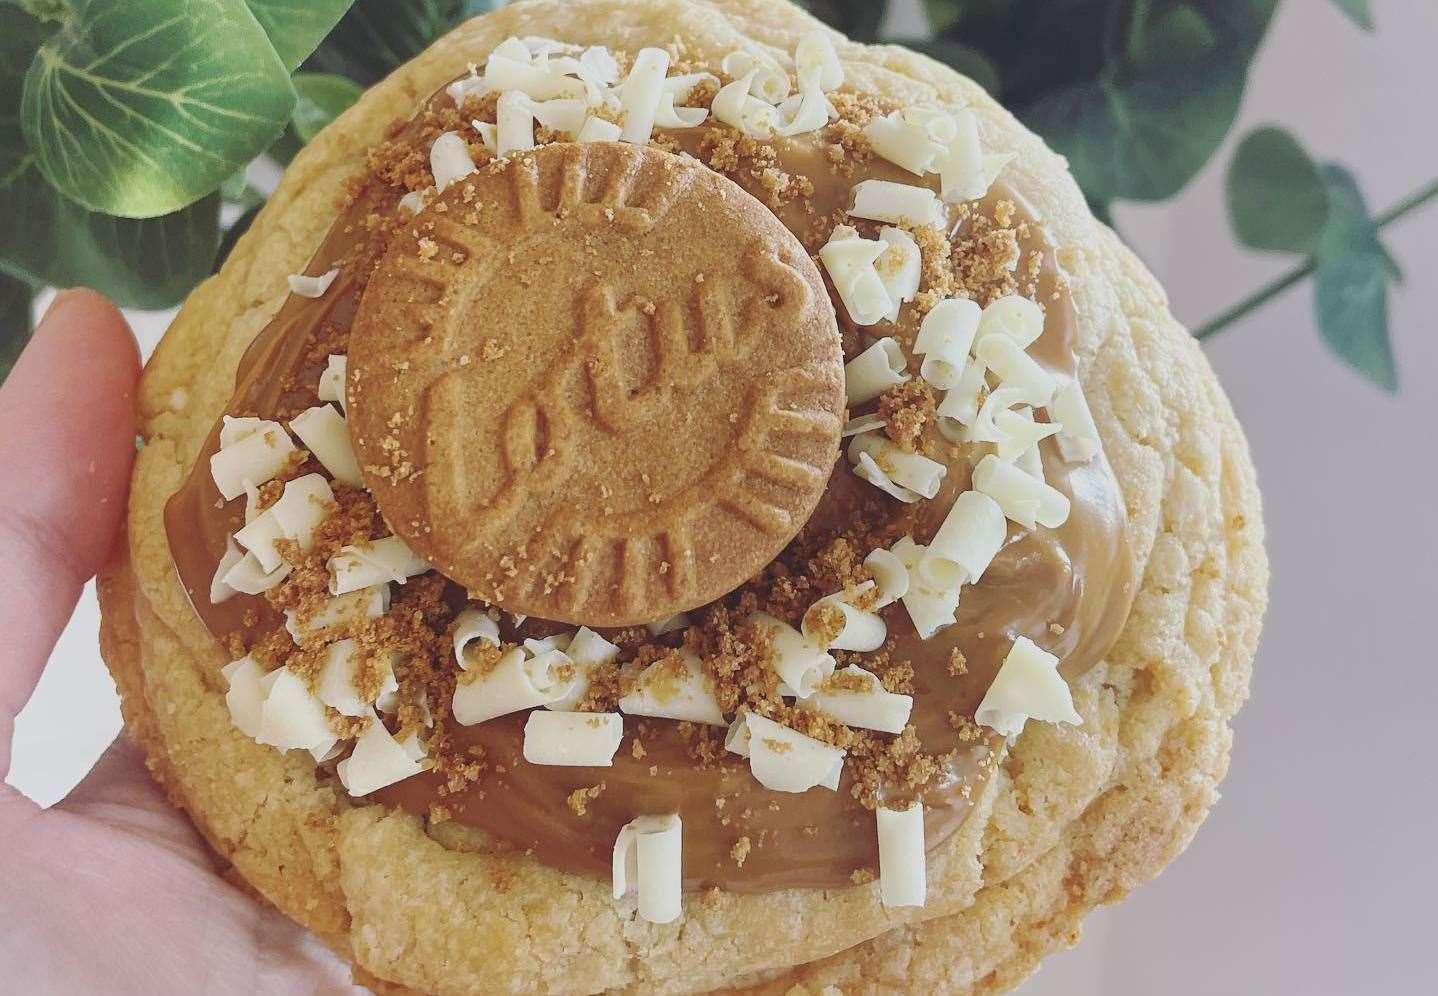 A stuffed Lotus cookie from Cheran's Bakery. Picture: Cheran's Bakery